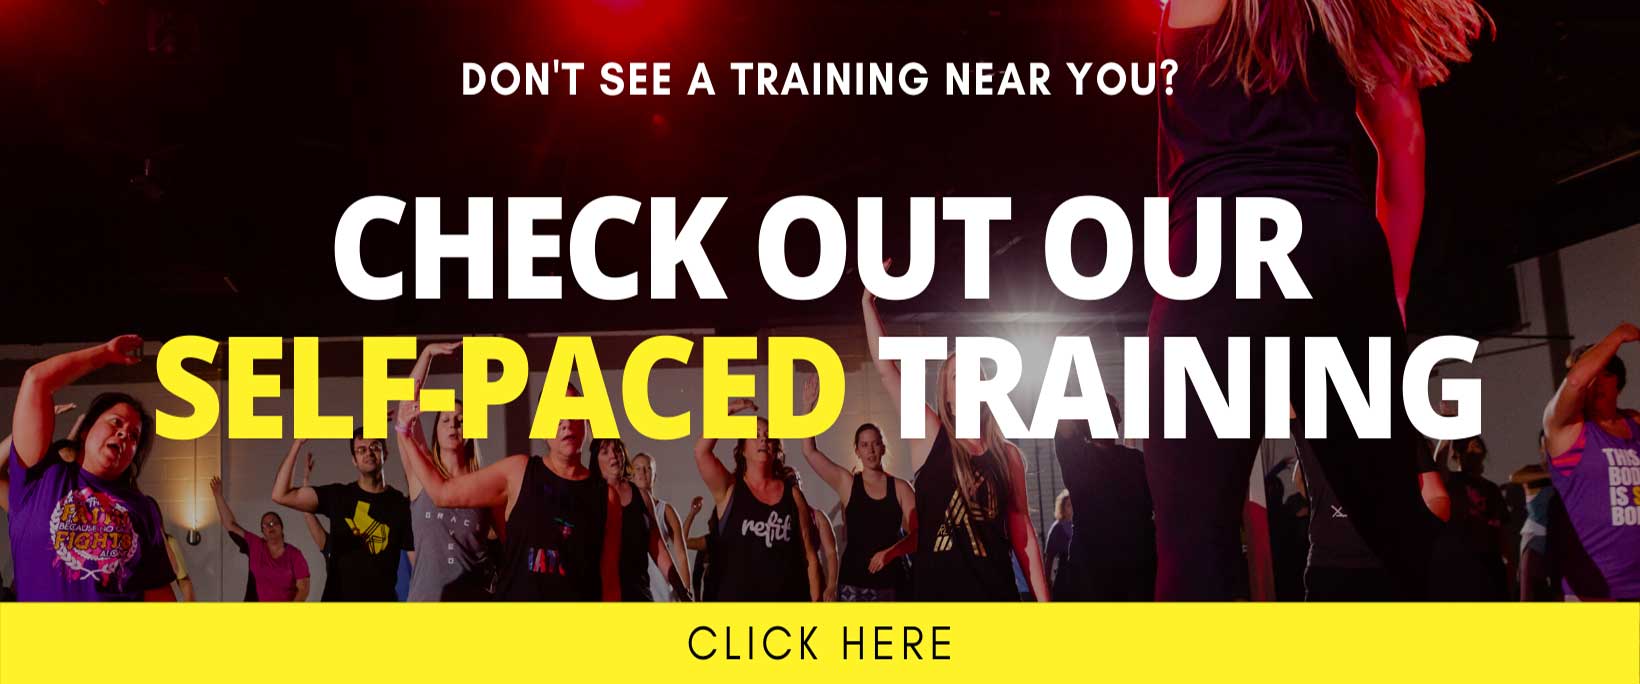 Don't See A Training Near You? Check Out Our Self-Paced Training. Click Here.